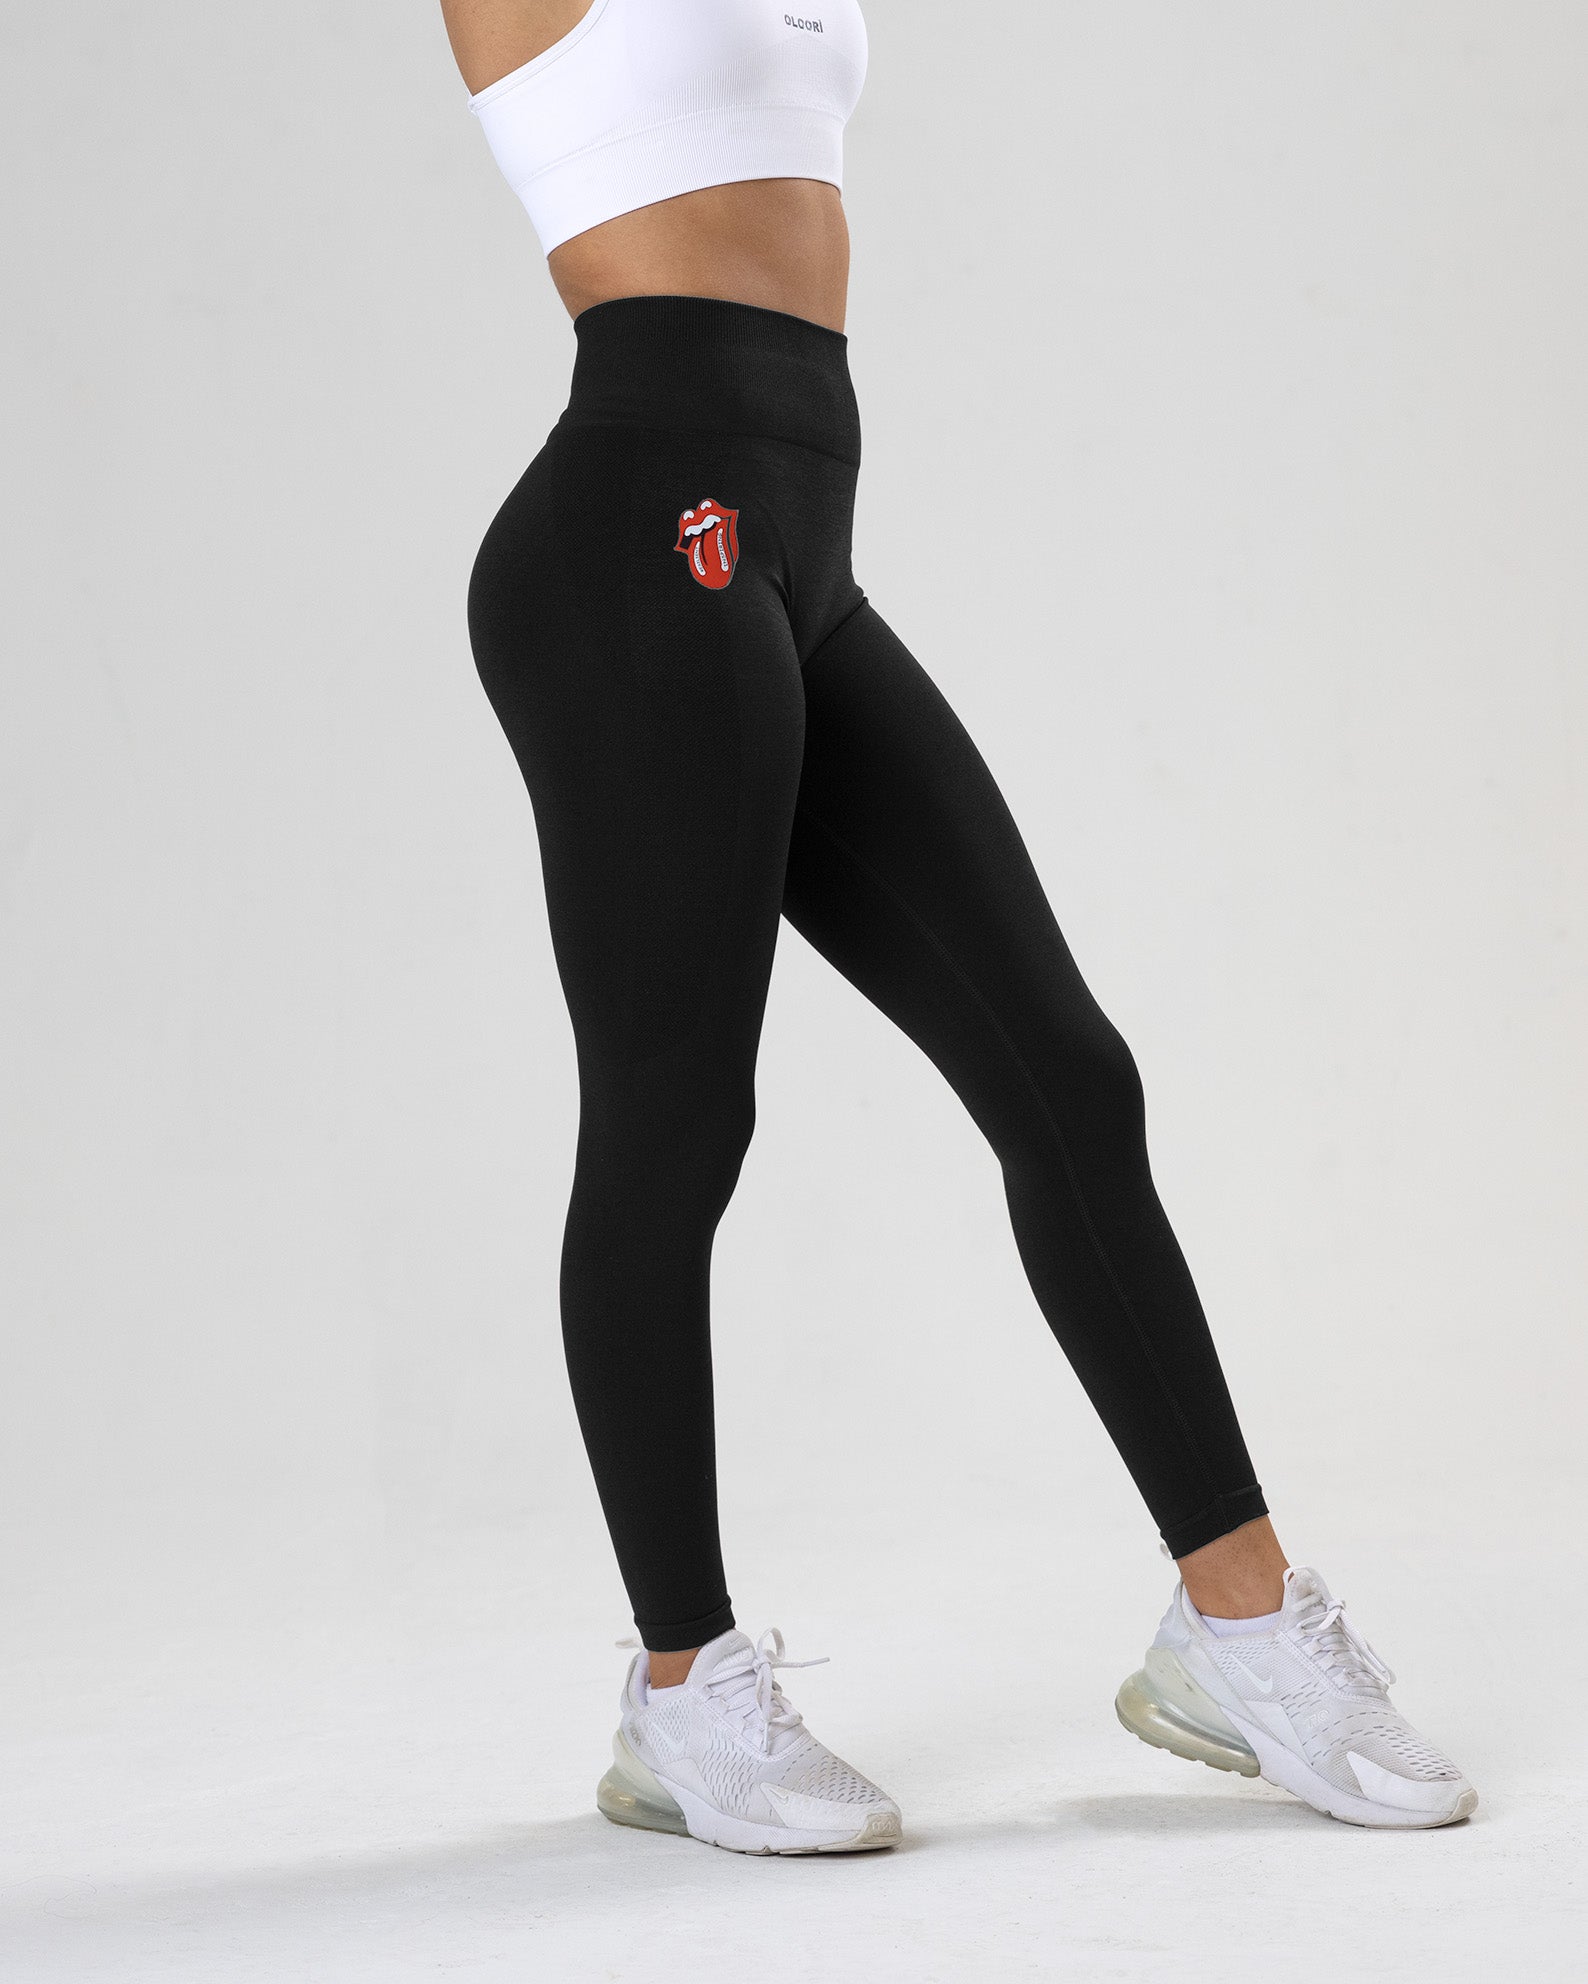 Fitness workout leggings - Panther black - Squat proof - High waist - –  Squat or Not